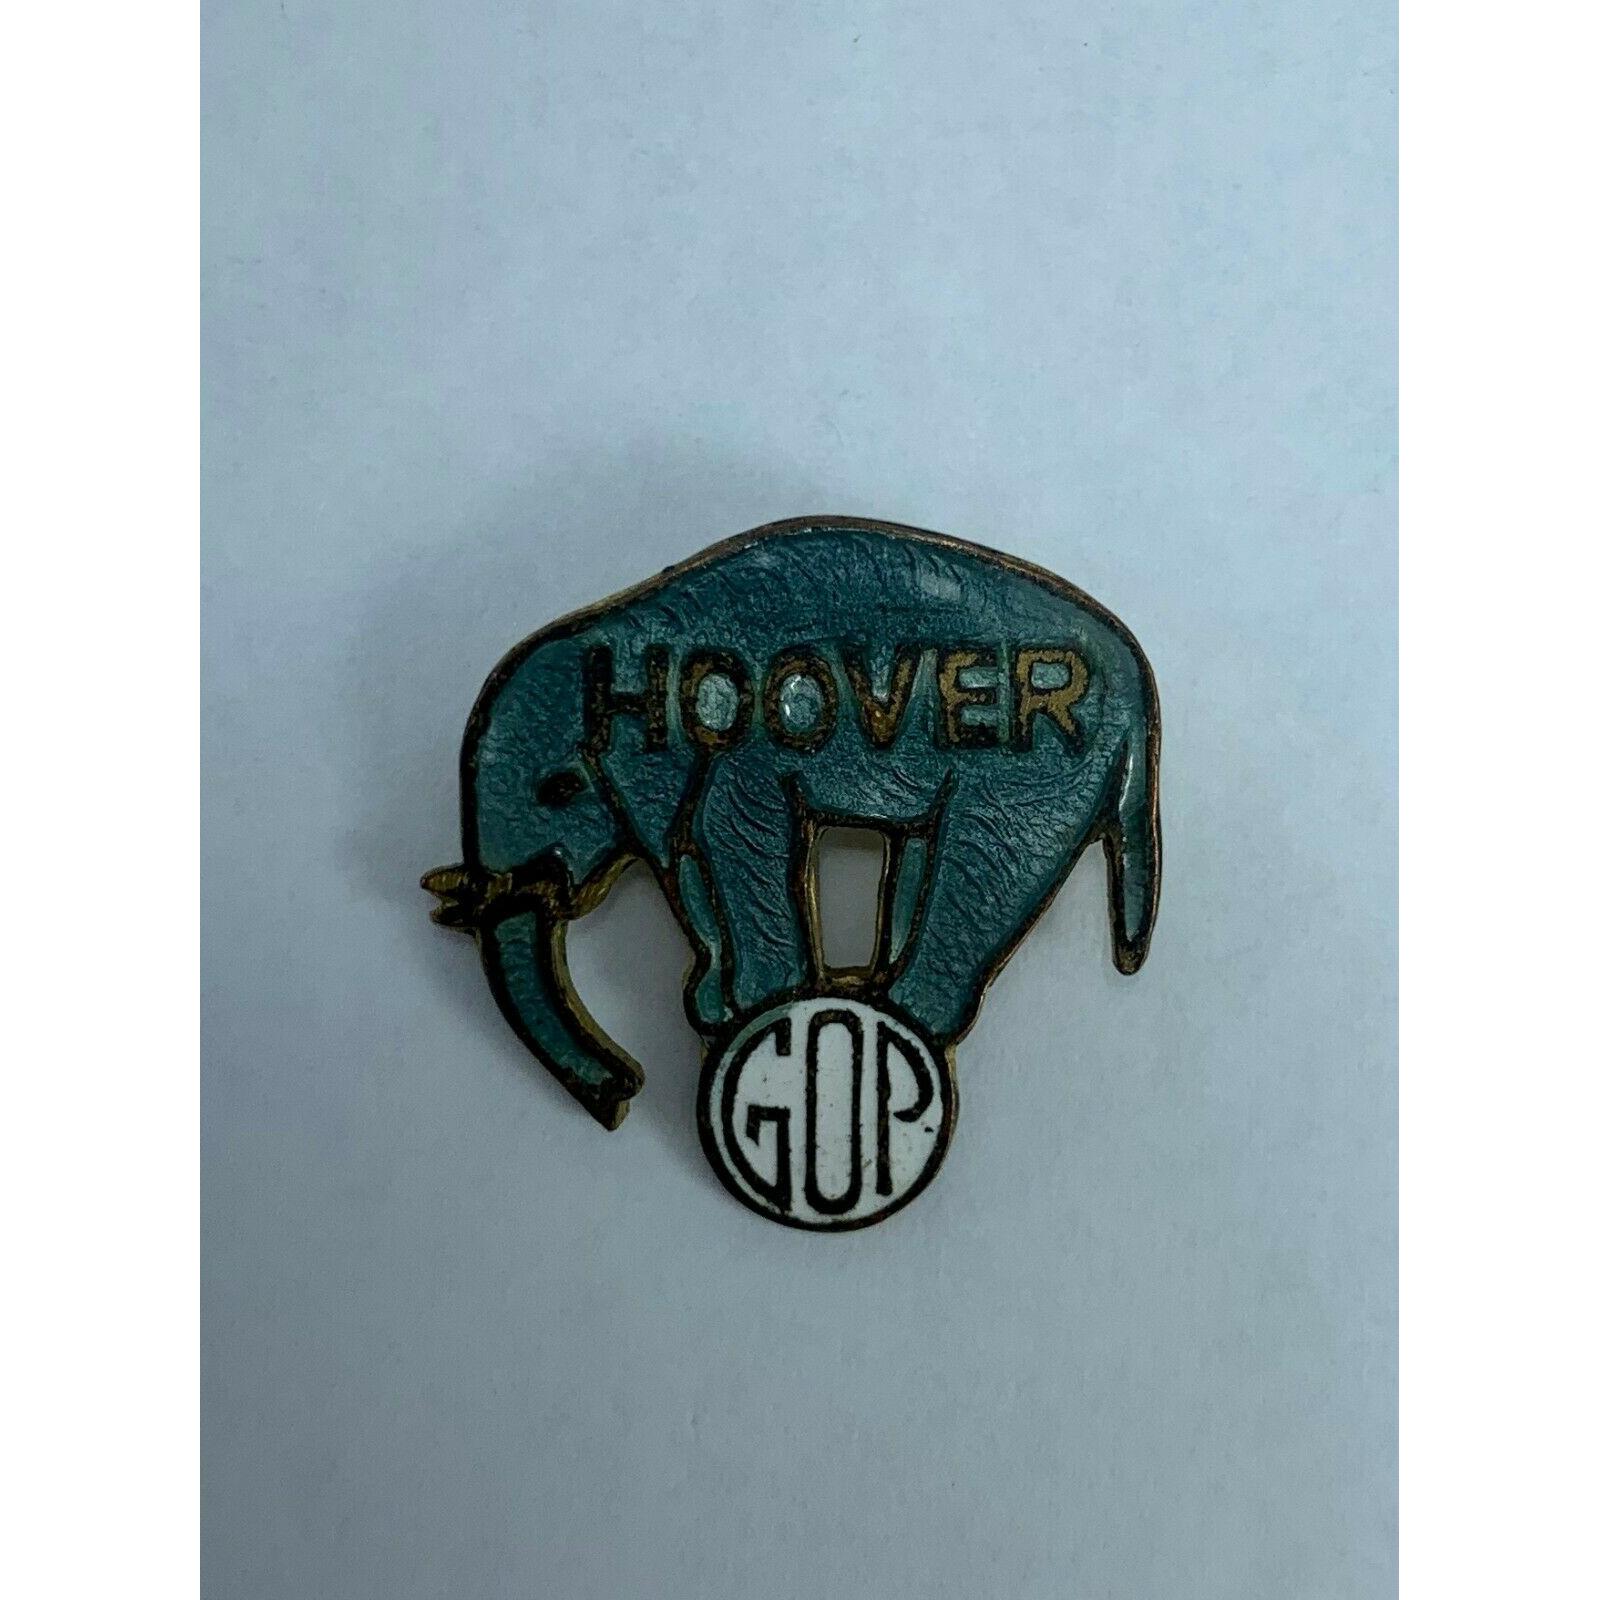 Hoover Campaign Pin